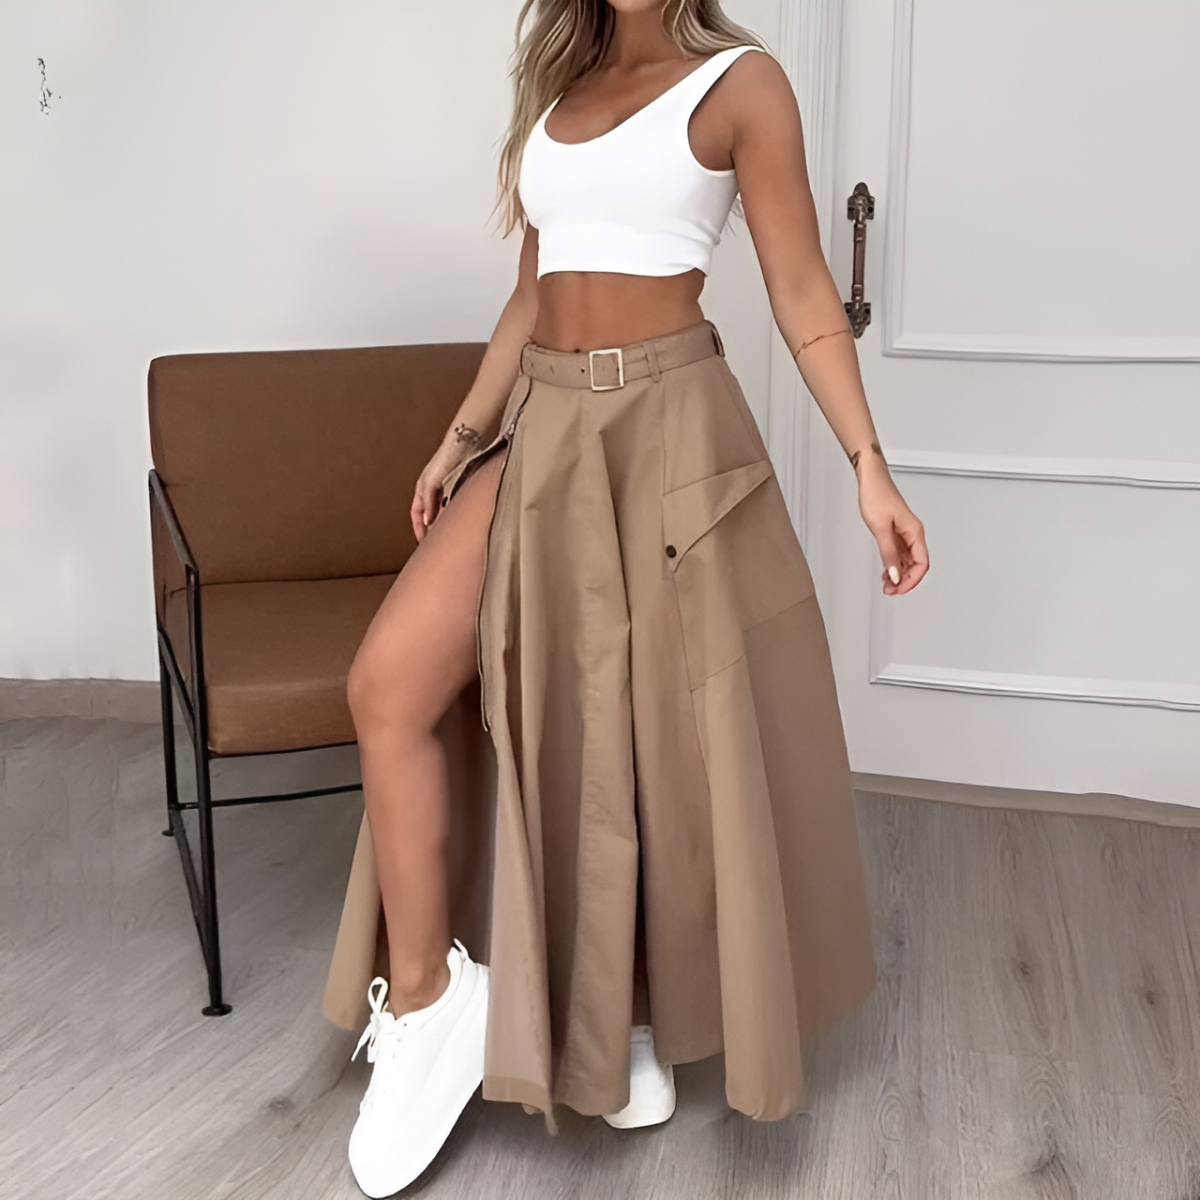 Sleeveless two-piece set with solid color and slit